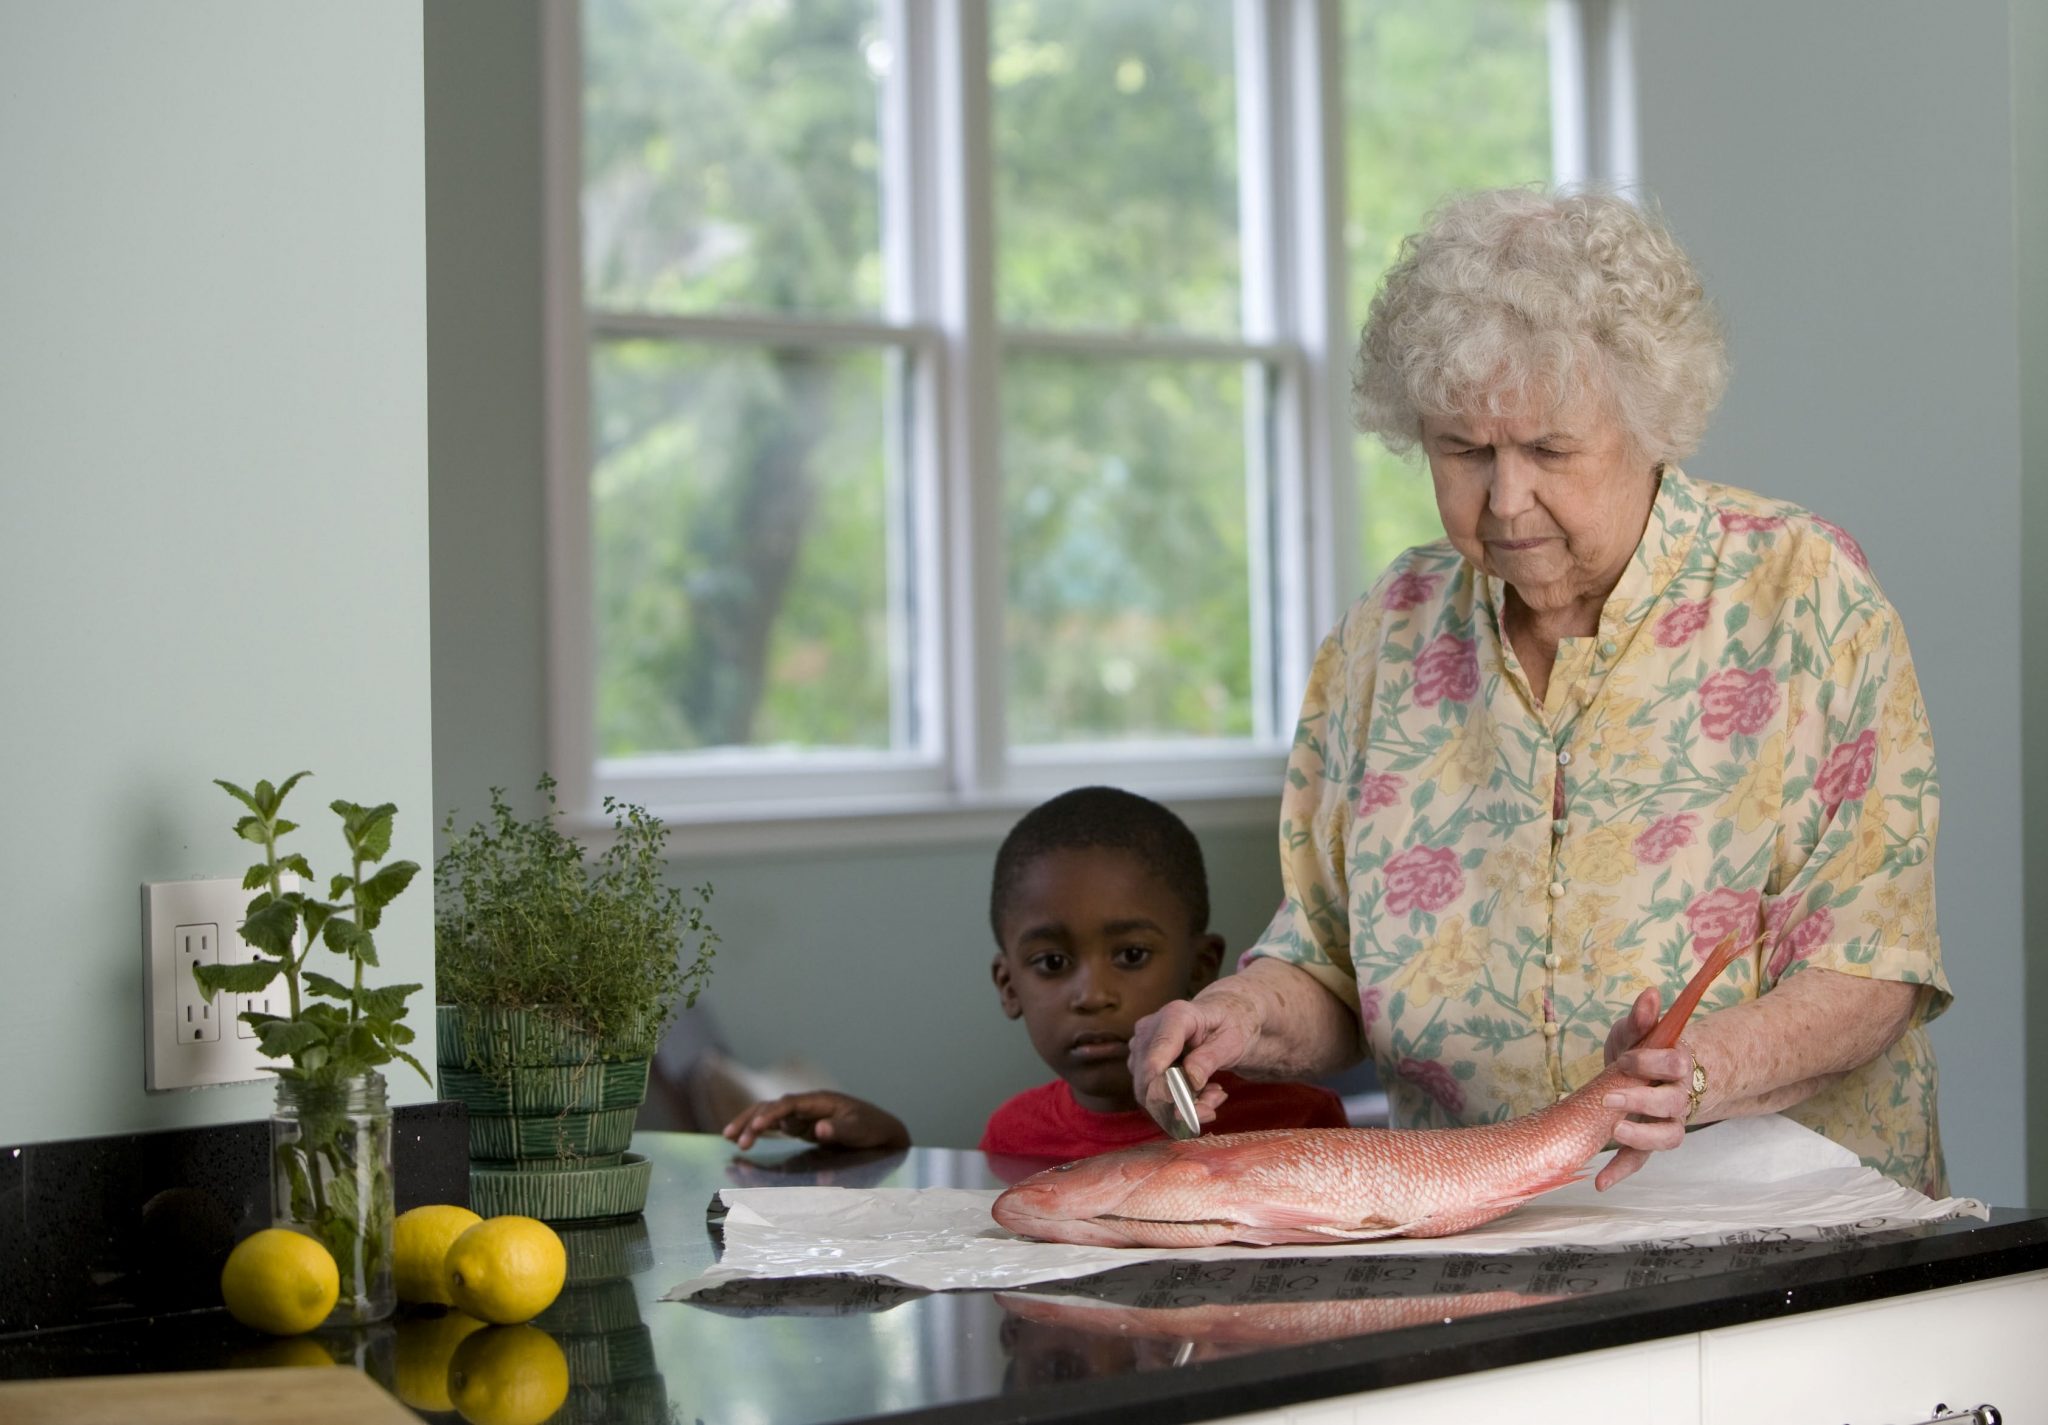 An older woman stands at a kitchen table with her grandson